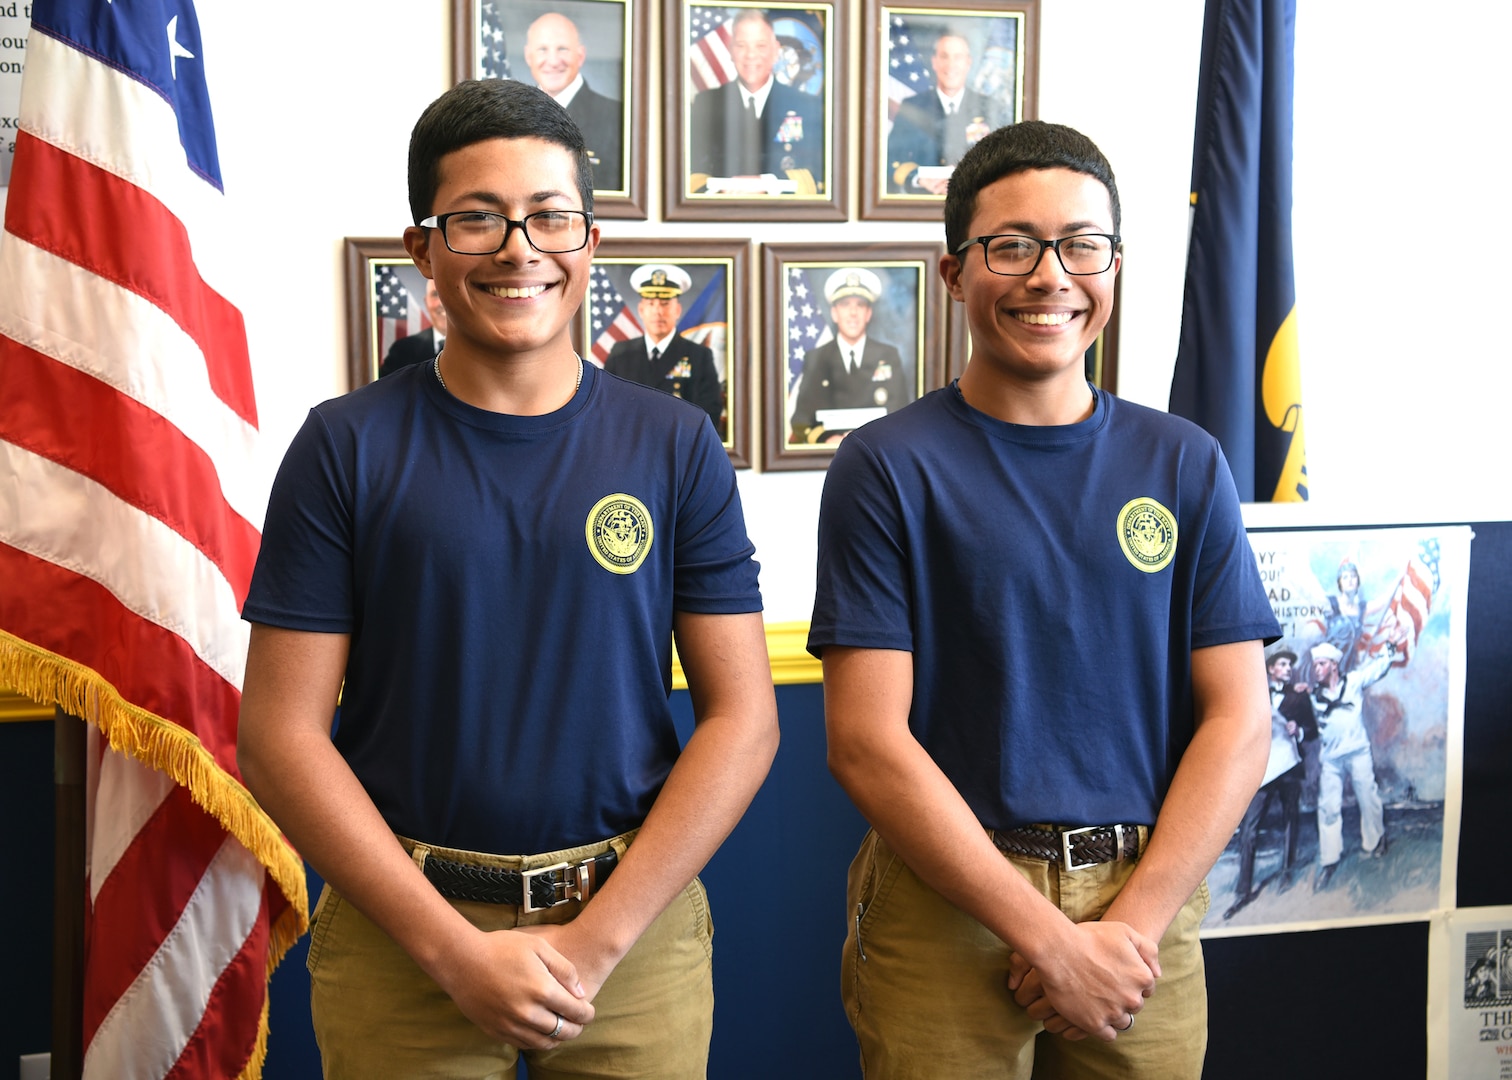 Twin brothers Kalvin (left) and Kelvin Rodriguez Rivera of San Antonio entered the Navy’s Delayed Entry Program and are making preparations to attend recruit training to become naval aircrewmen.  The brothers, who are seniors at Highlands High School, were recruited by Petty Officer 2nd Class Brandon Rodriguez of Navy Recruiting Station Southeast San Antonio.